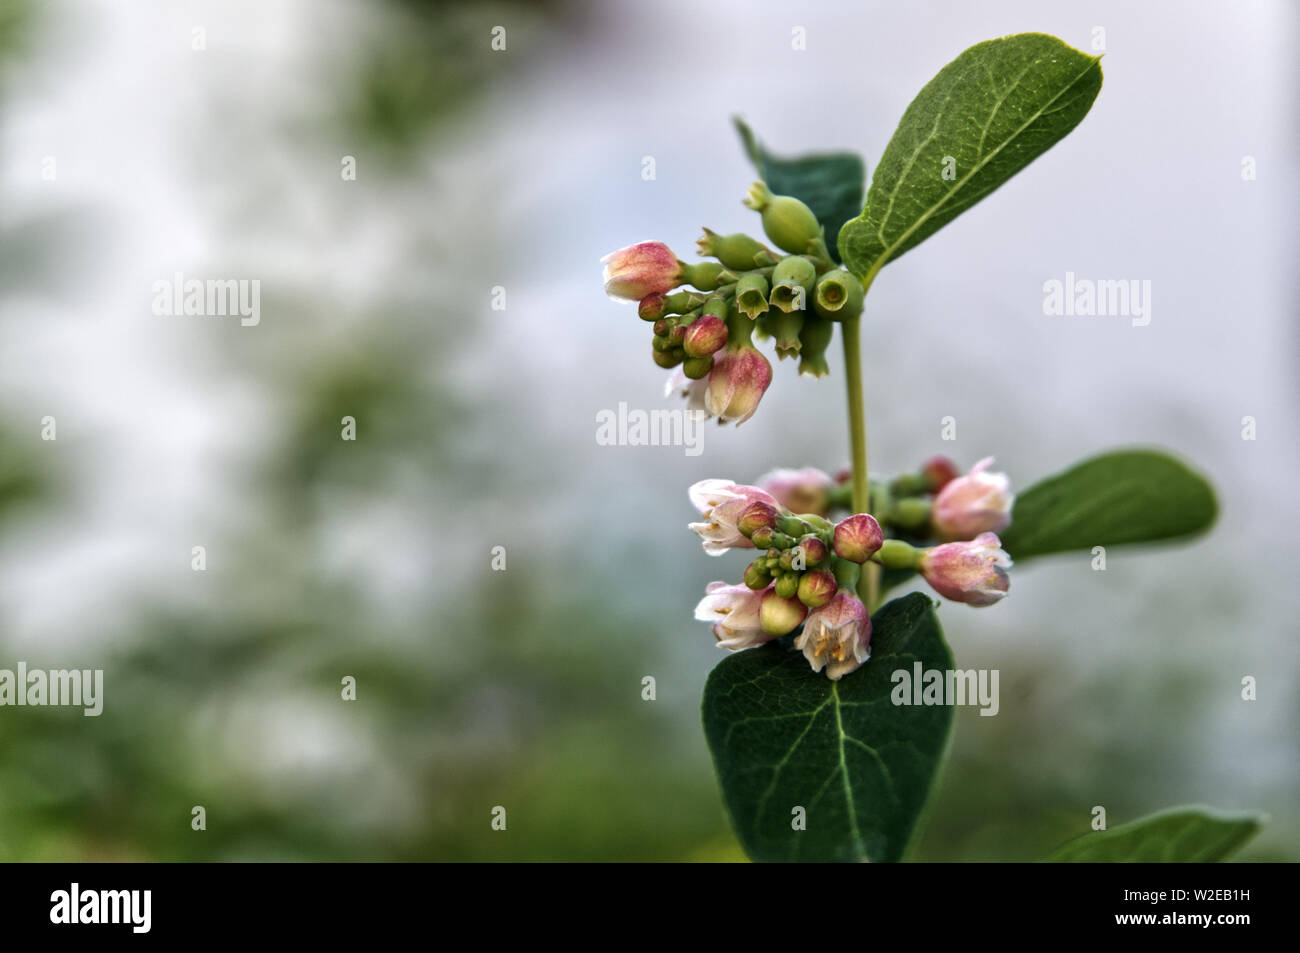 close-up of a flowering snowberry shrub with blossoms in pink and white shades Stock Photo